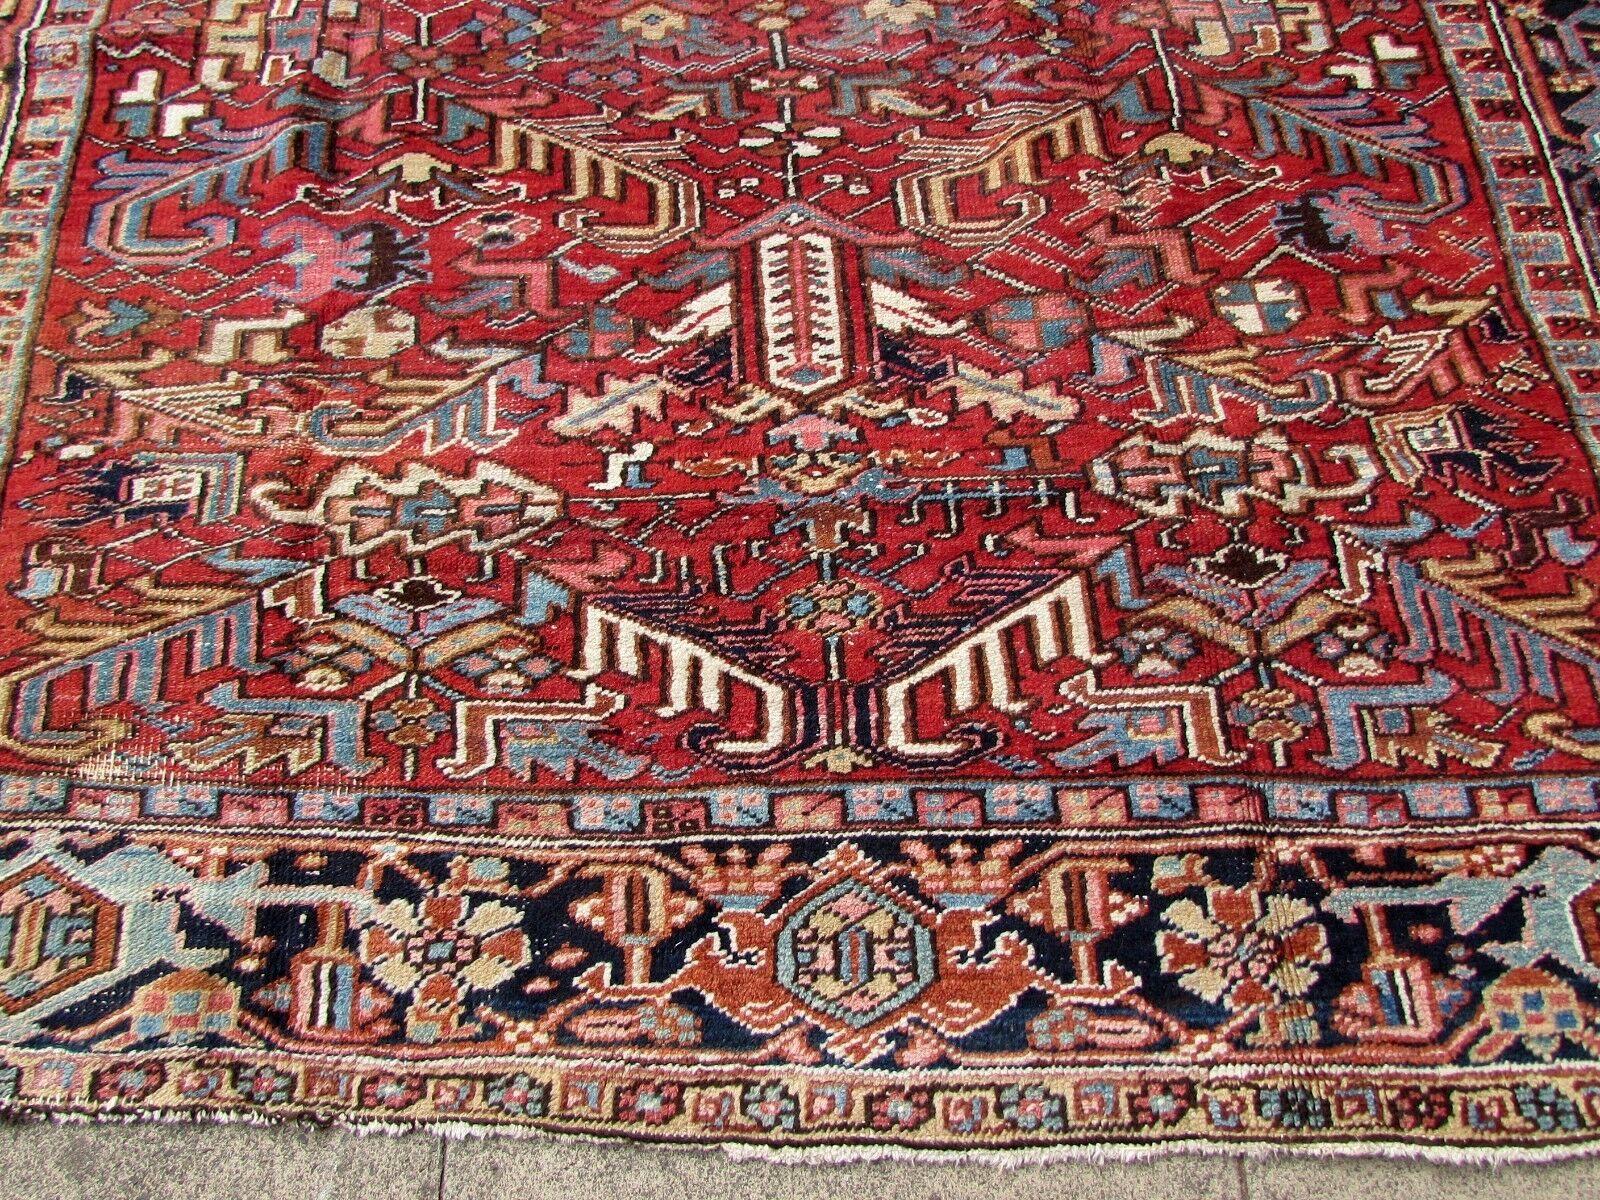 1920s style rug